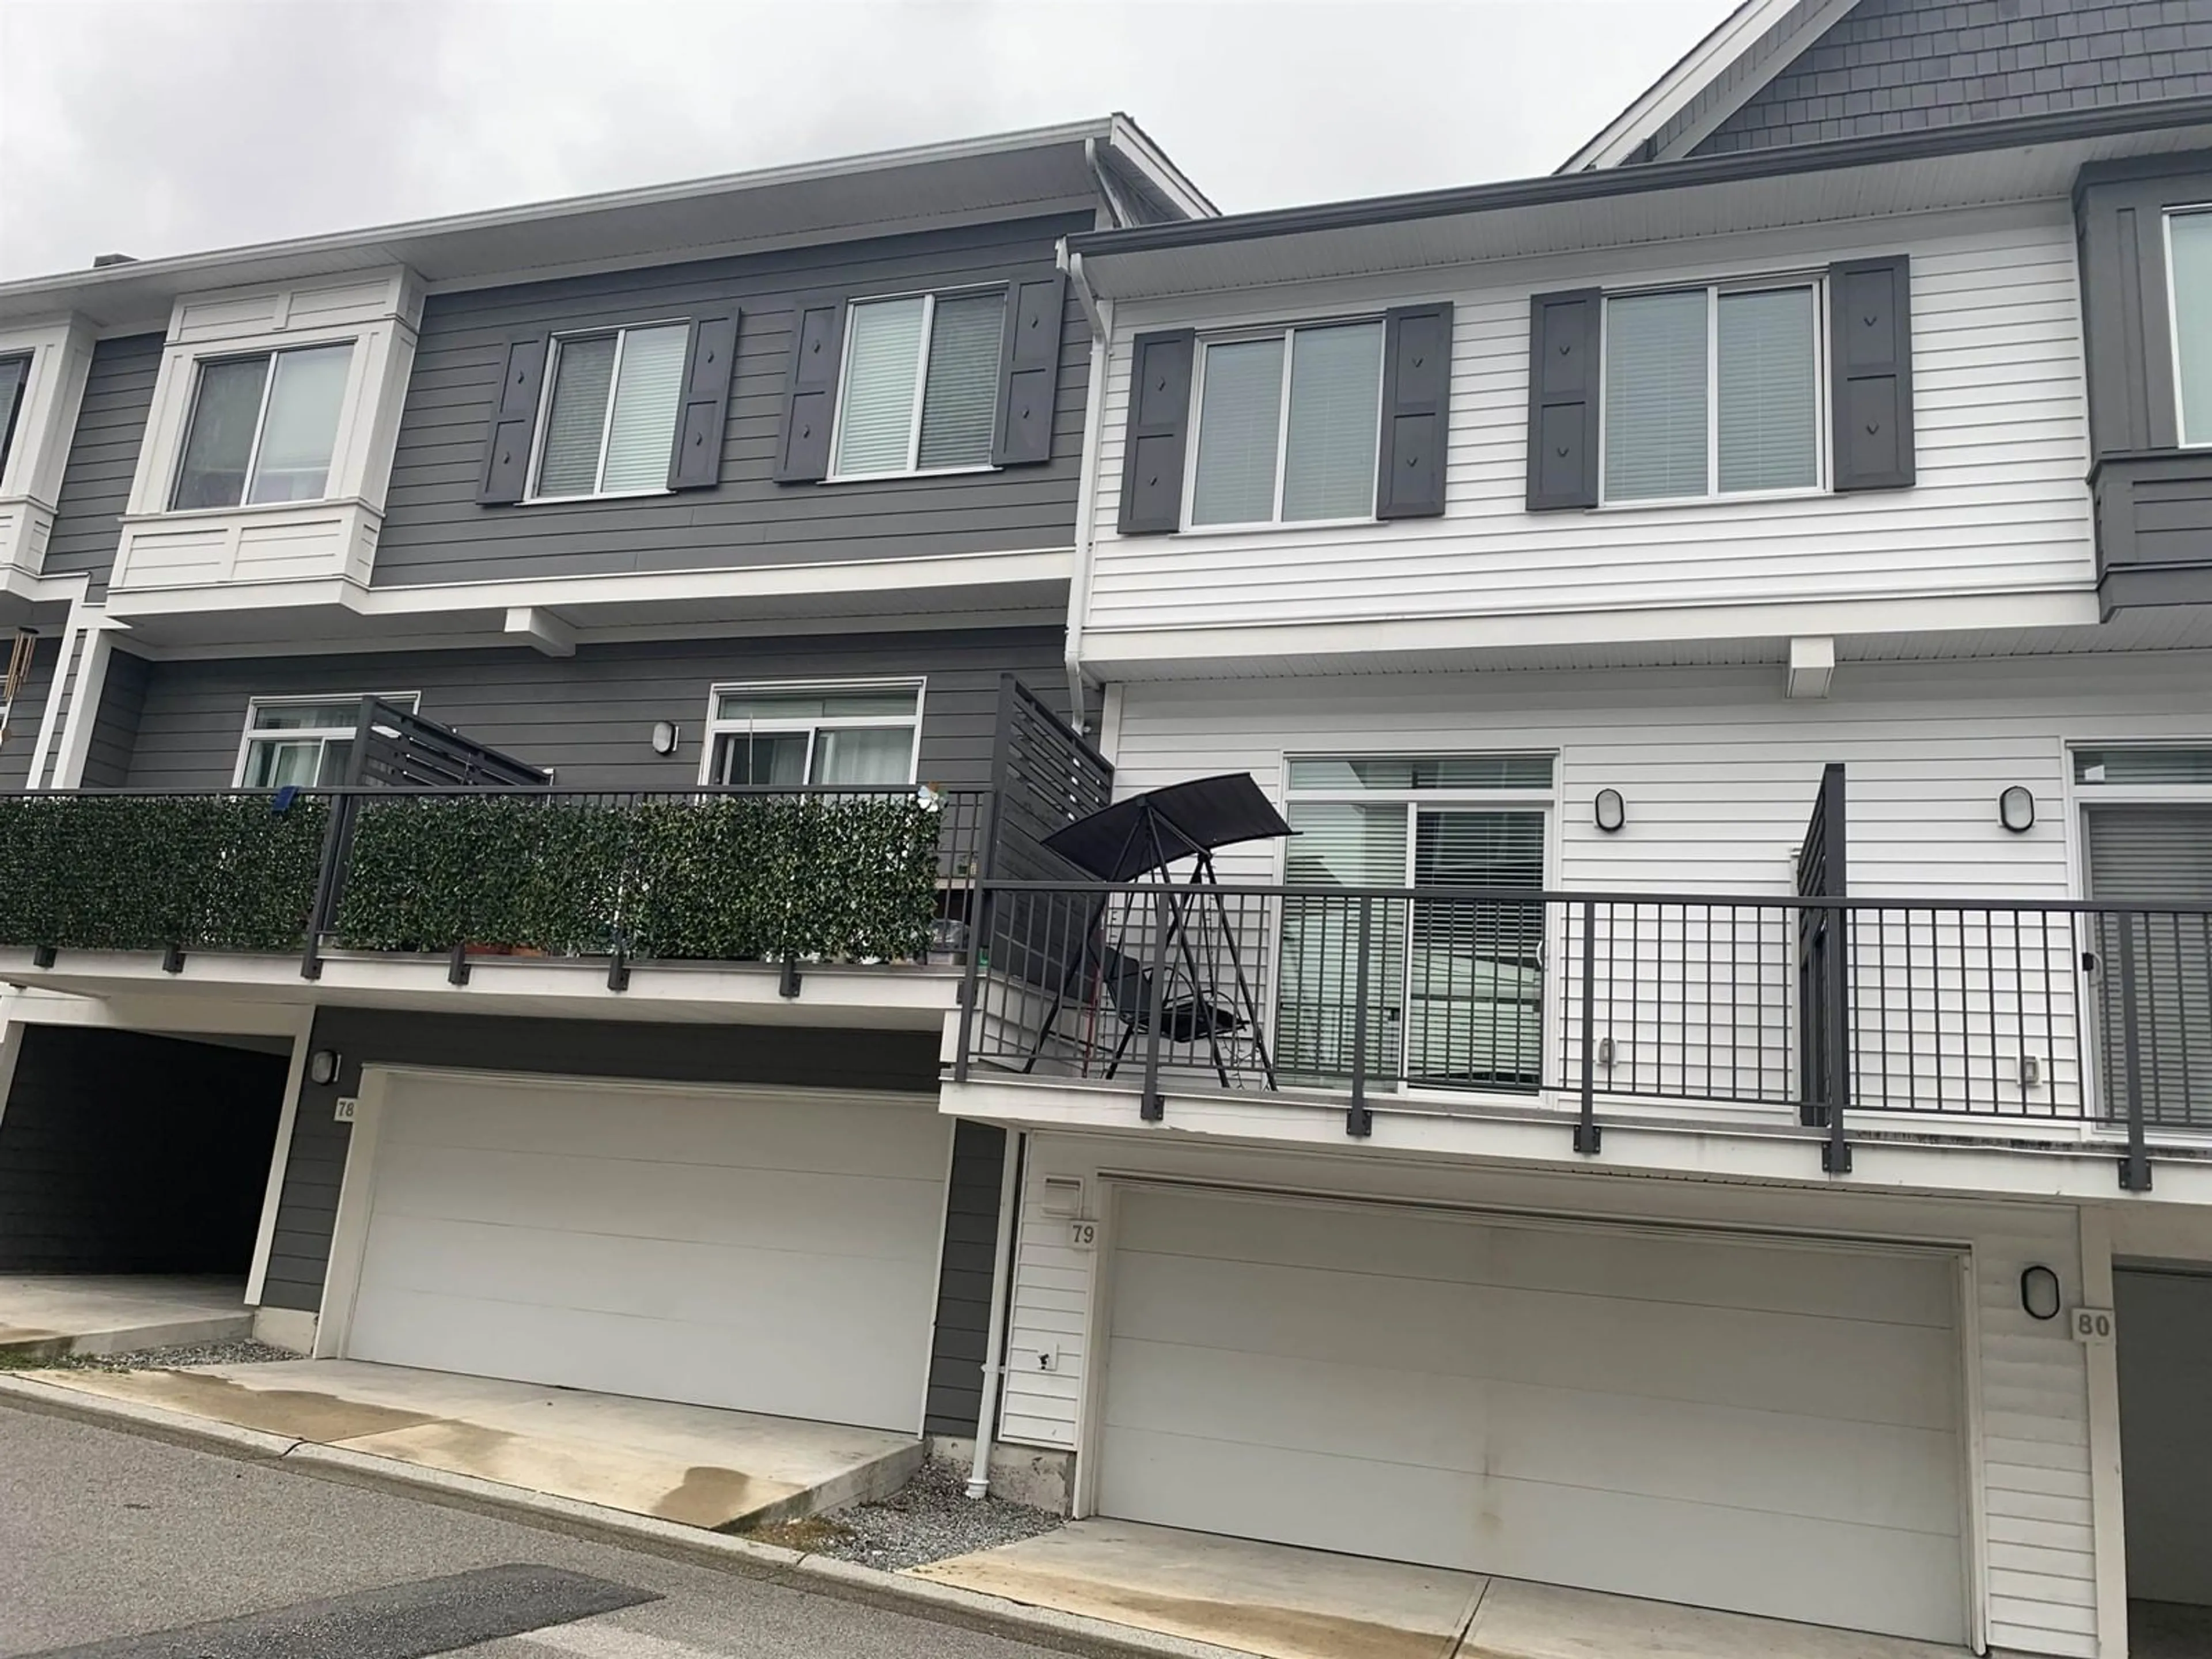 A pic from exterior of the house or condo for 79 8130 136A STREET, Surrey British Columbia V3W1H9